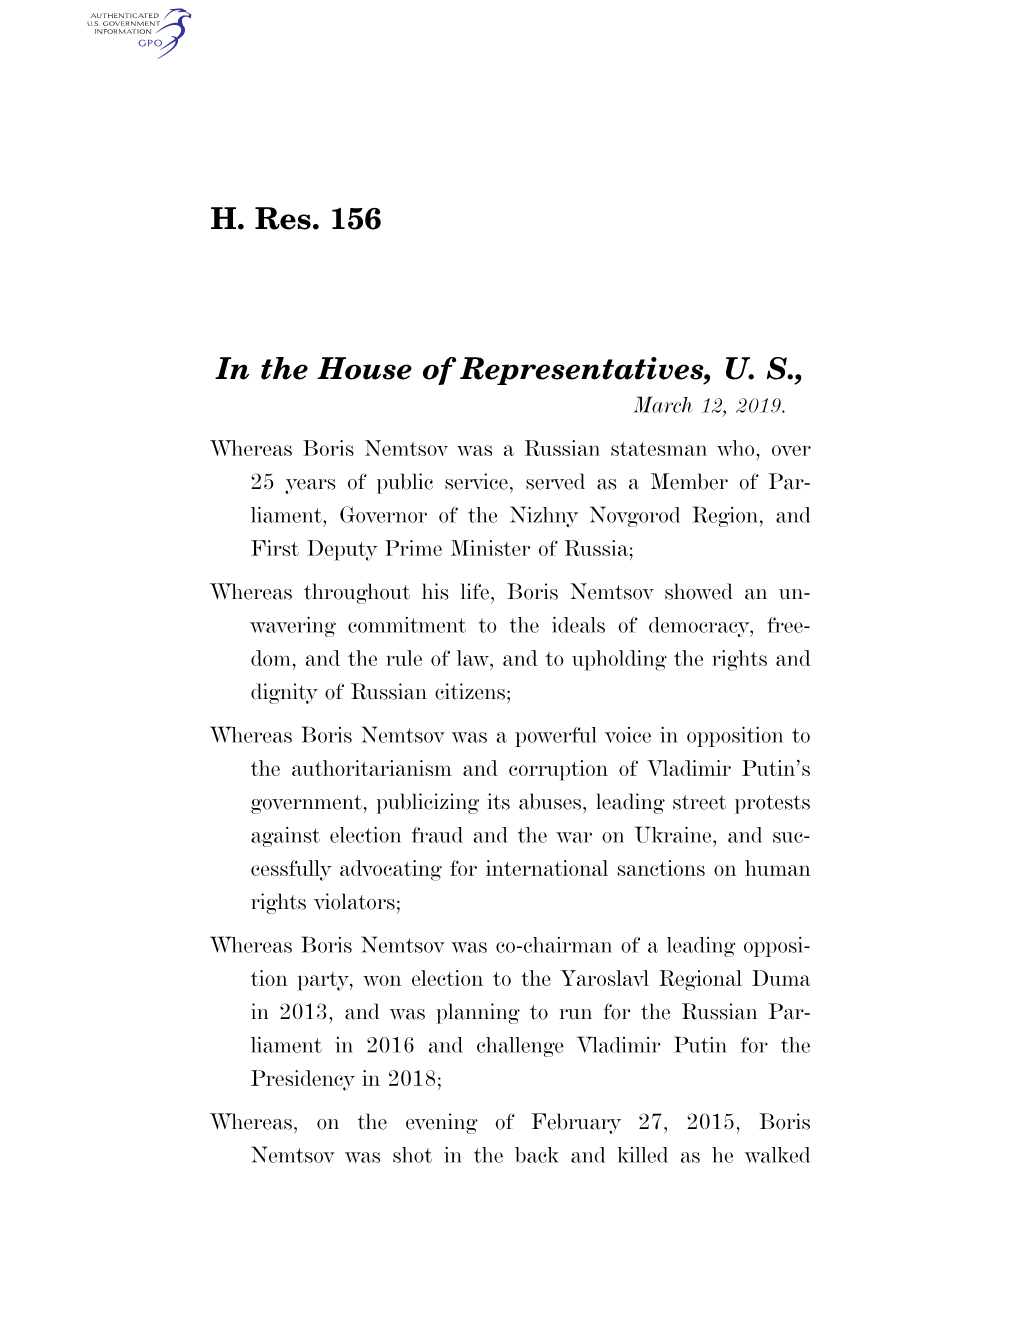 H. Res. 156 in the House of Representatives, U